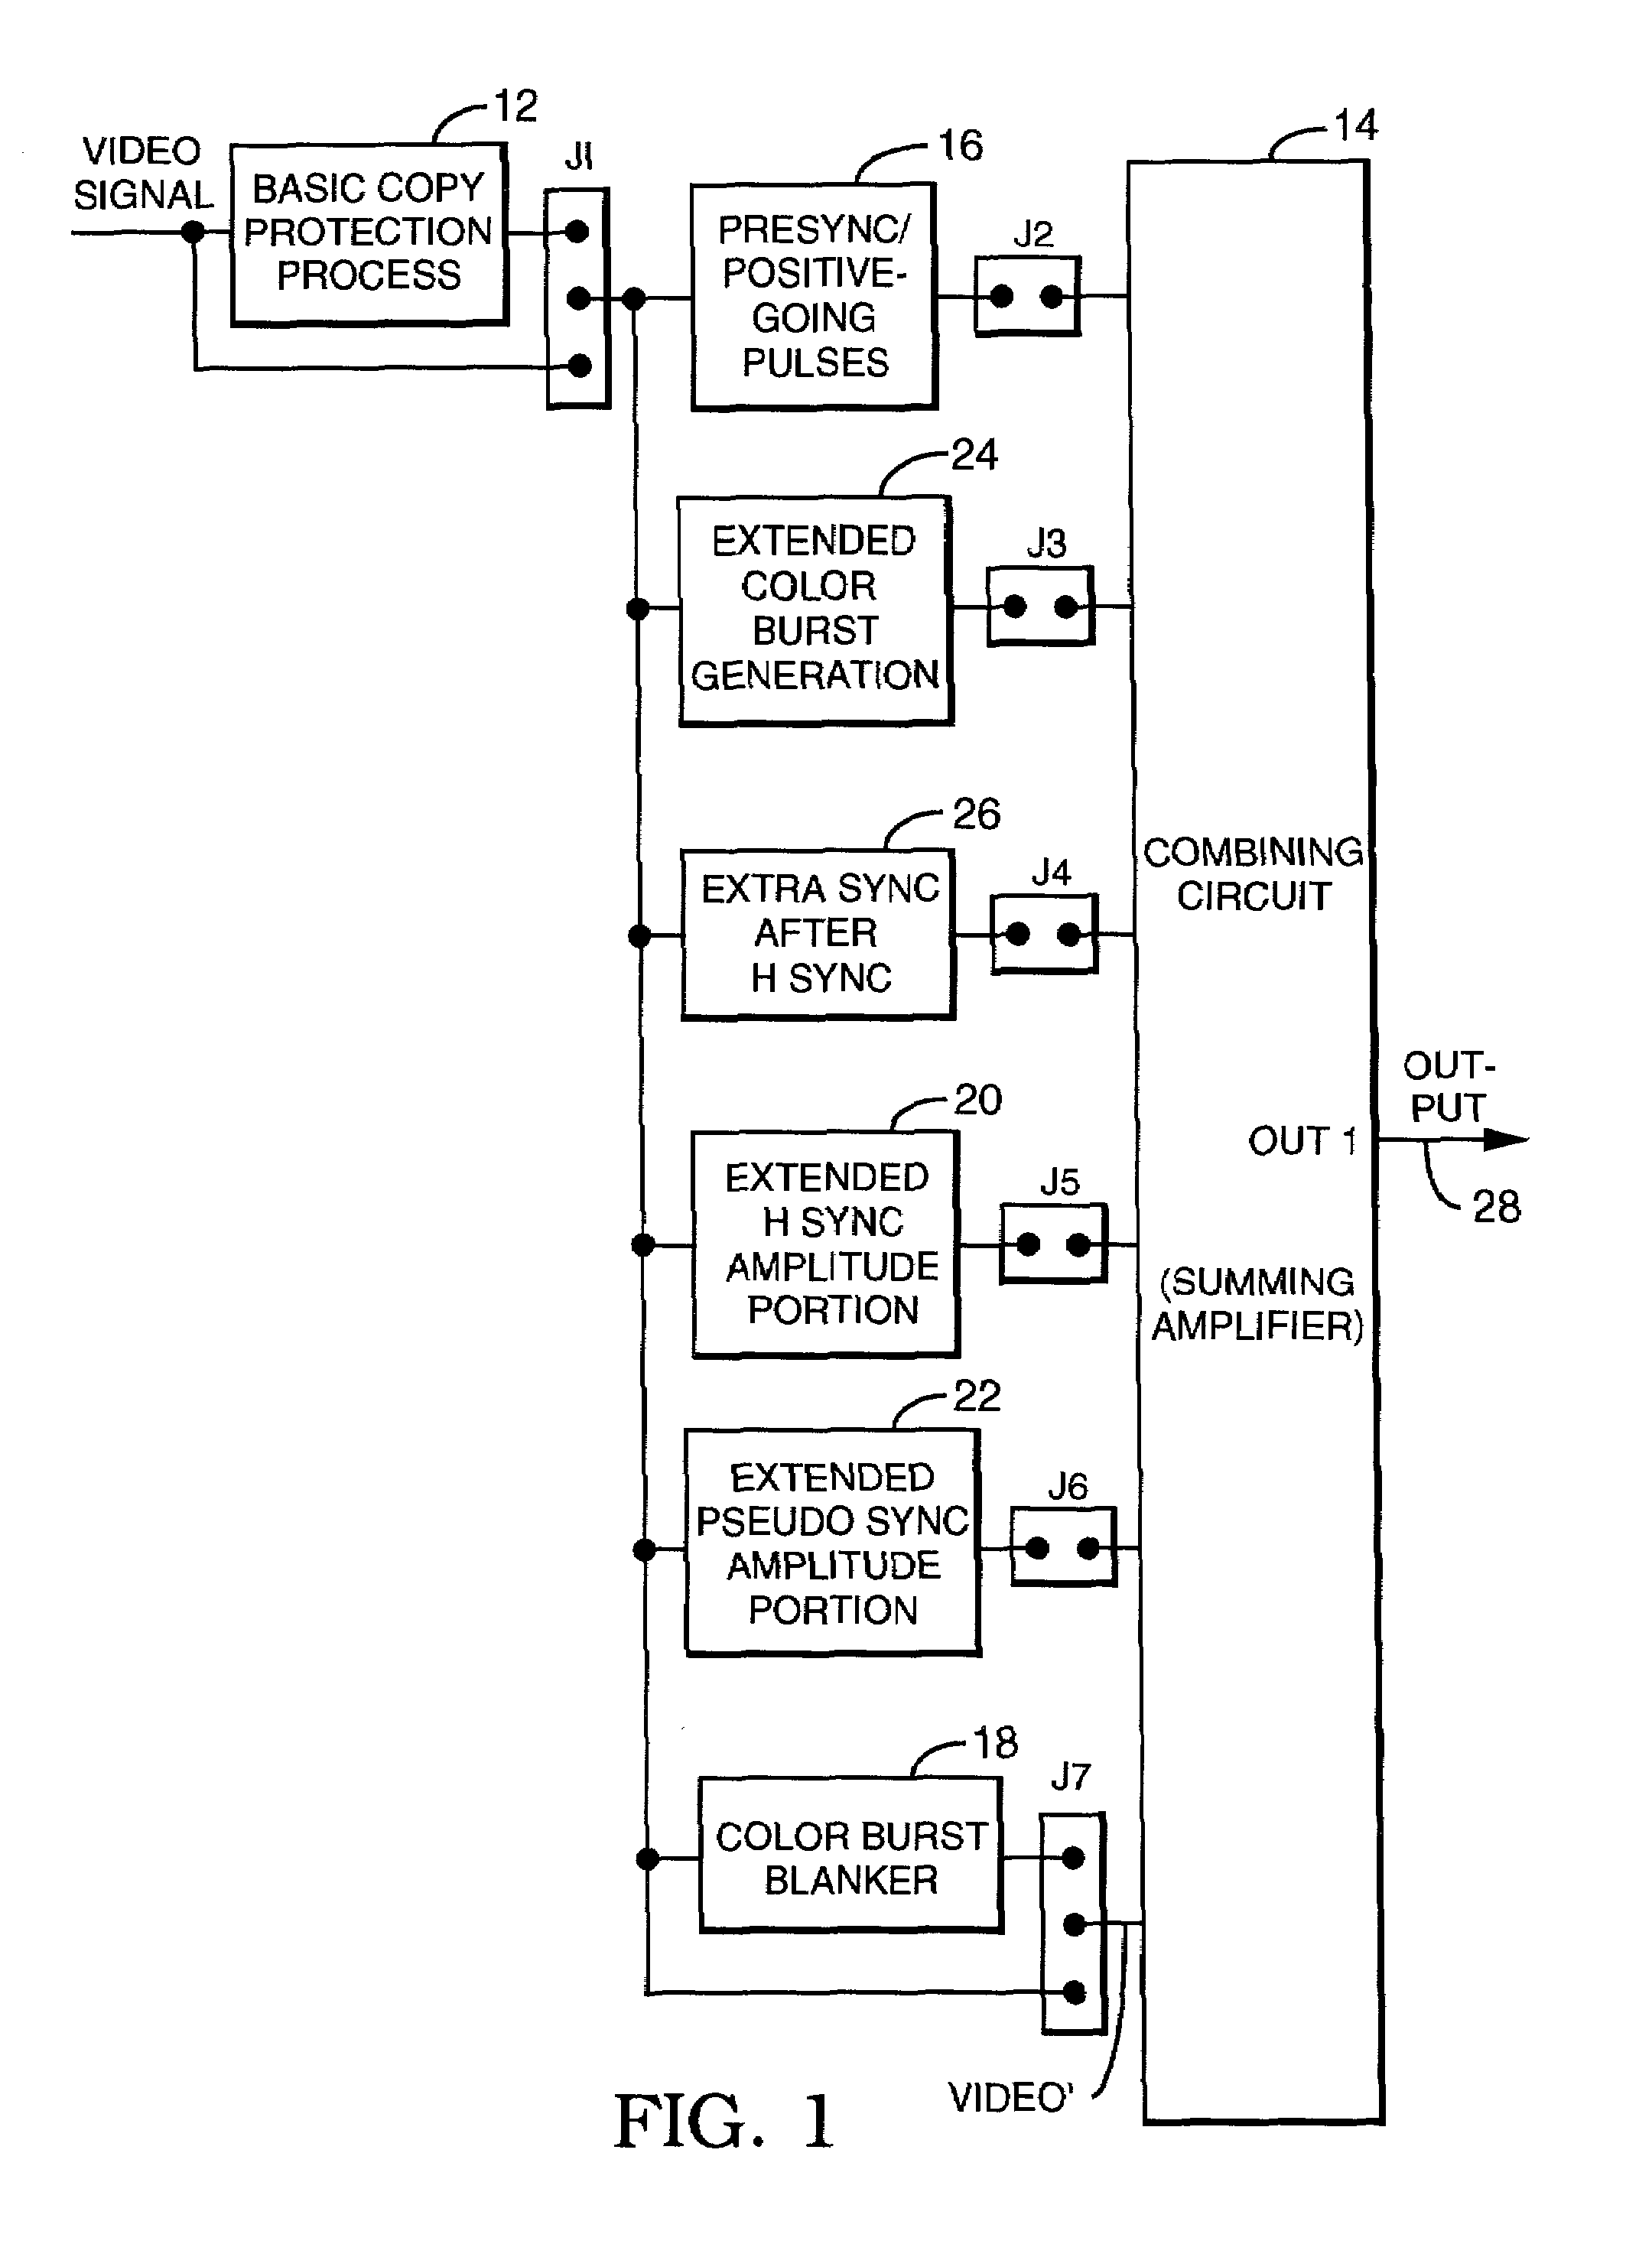 Method and apparatus for providing or enhancing copy protection by adding selected negative-going and positive-going pulses in a video signal HBI